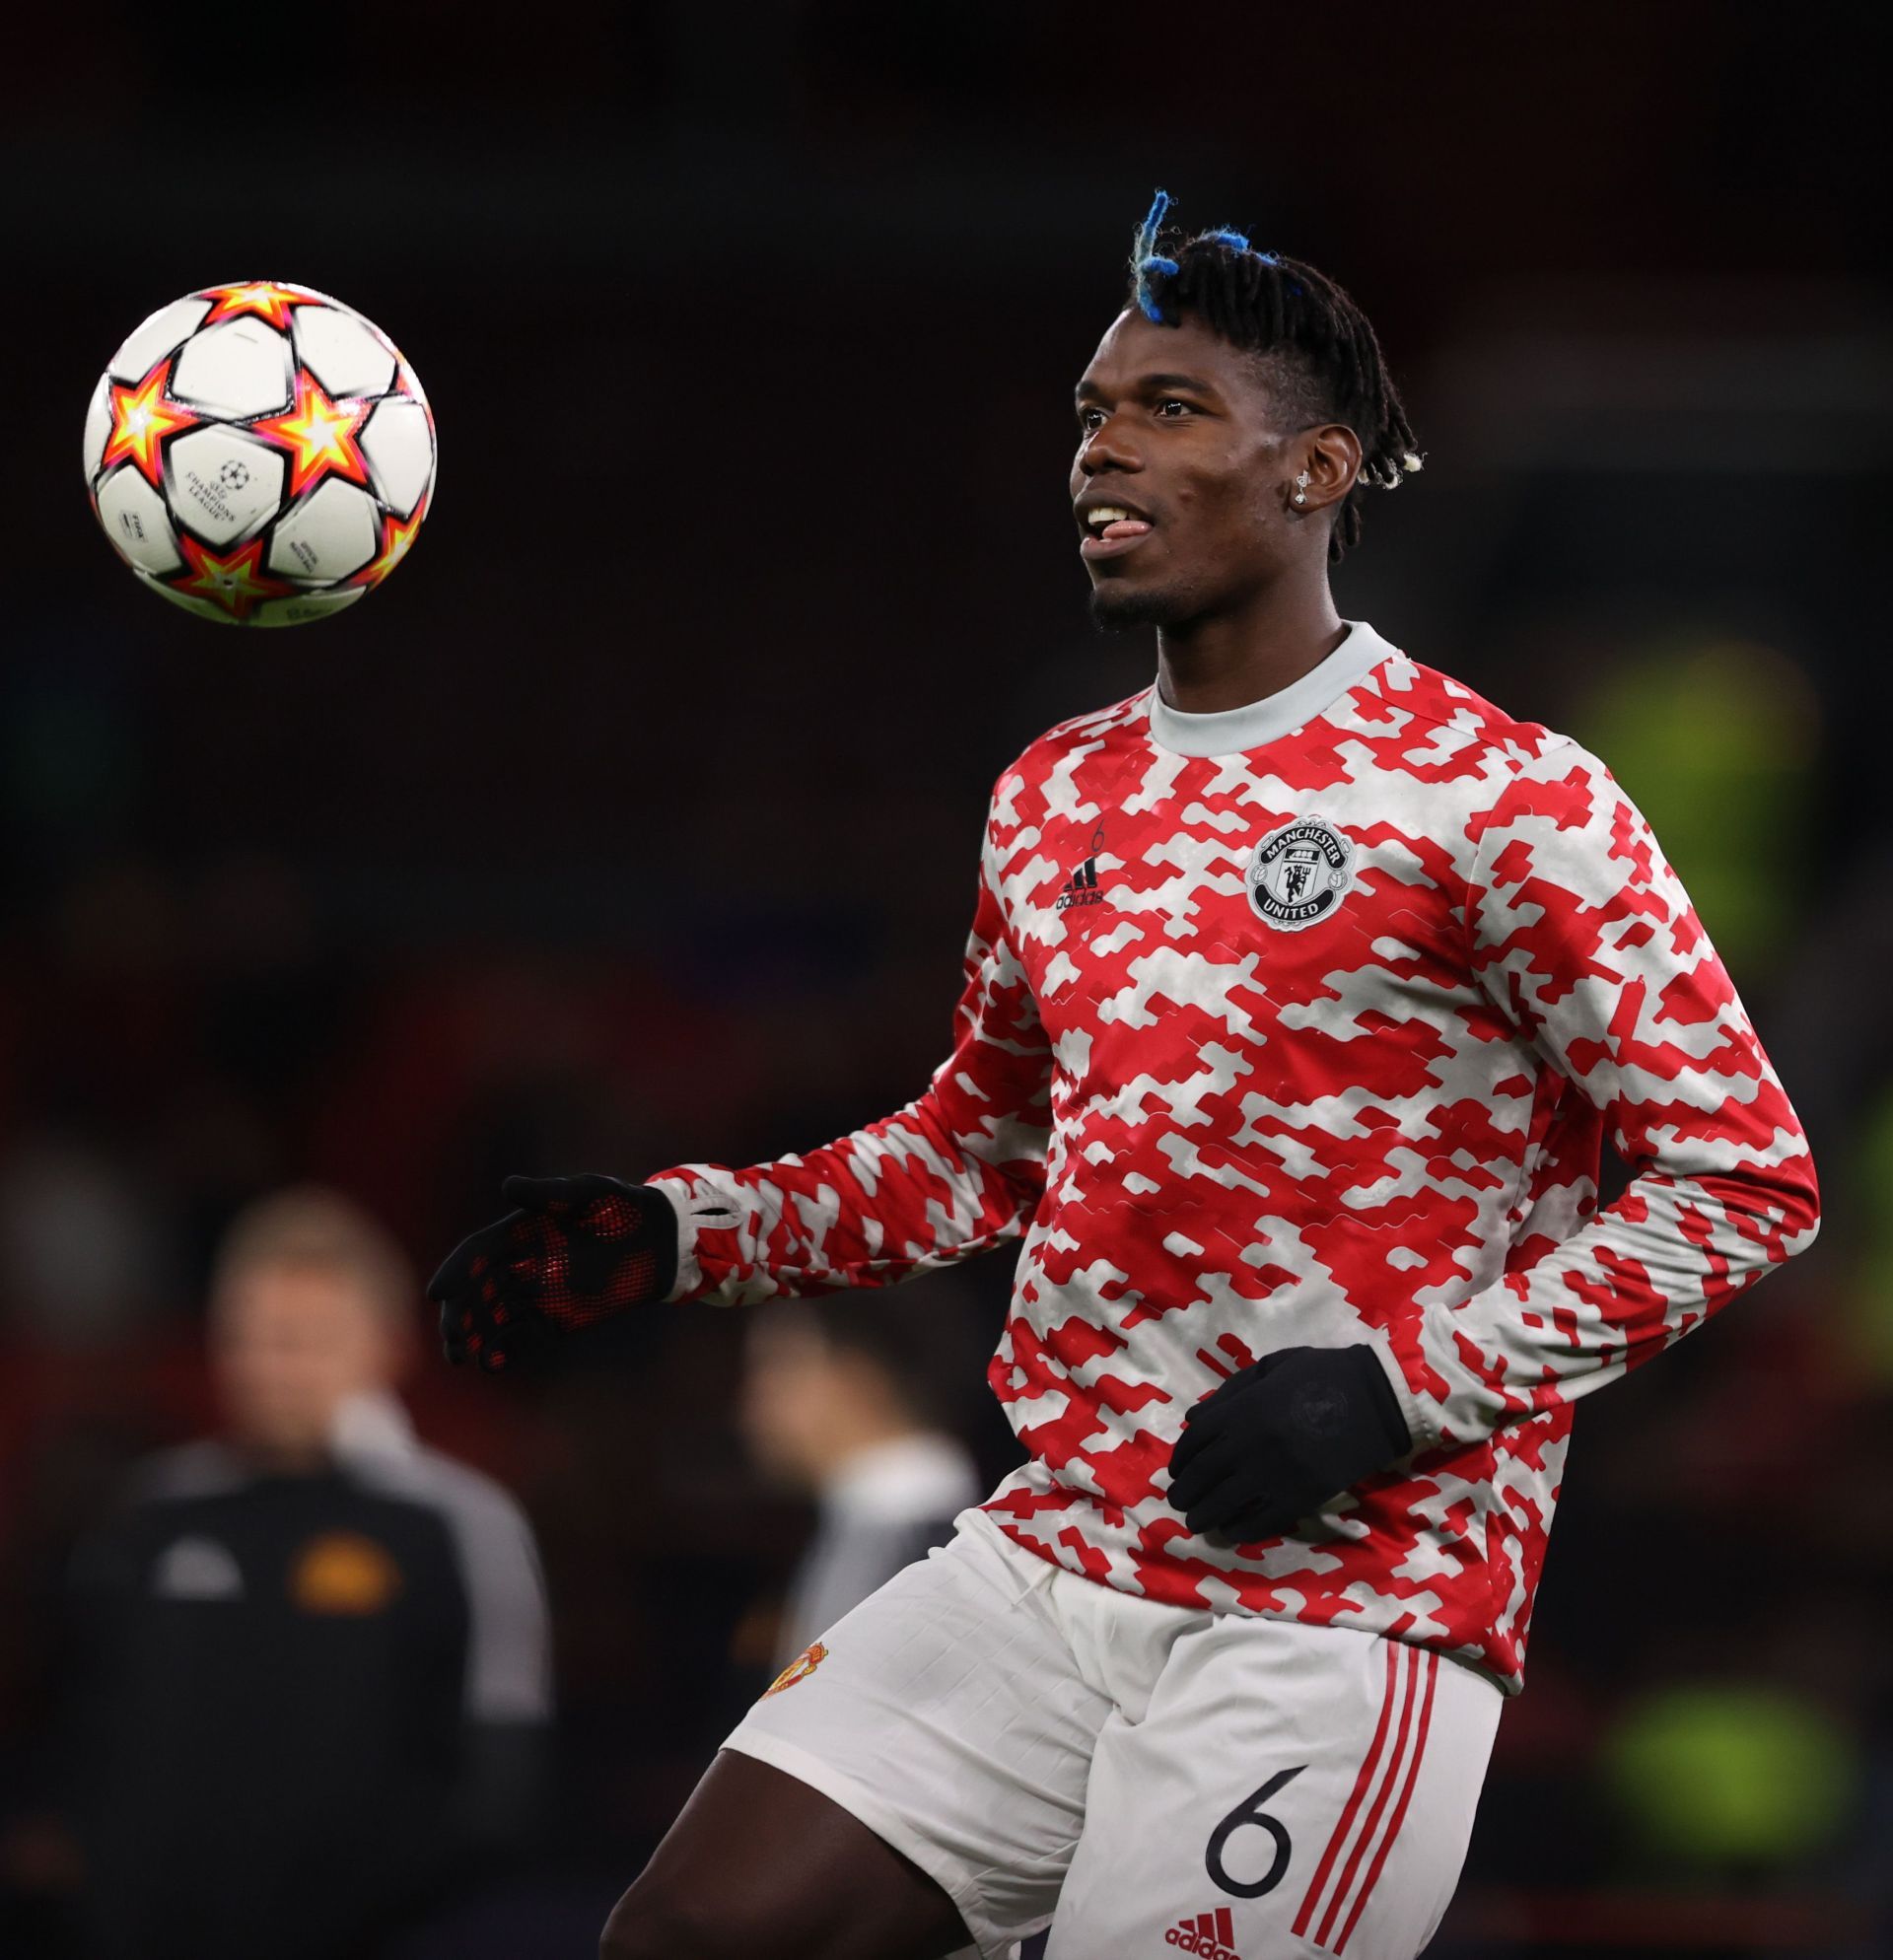 Pogba has started this campaign on a bright note in the Premier League